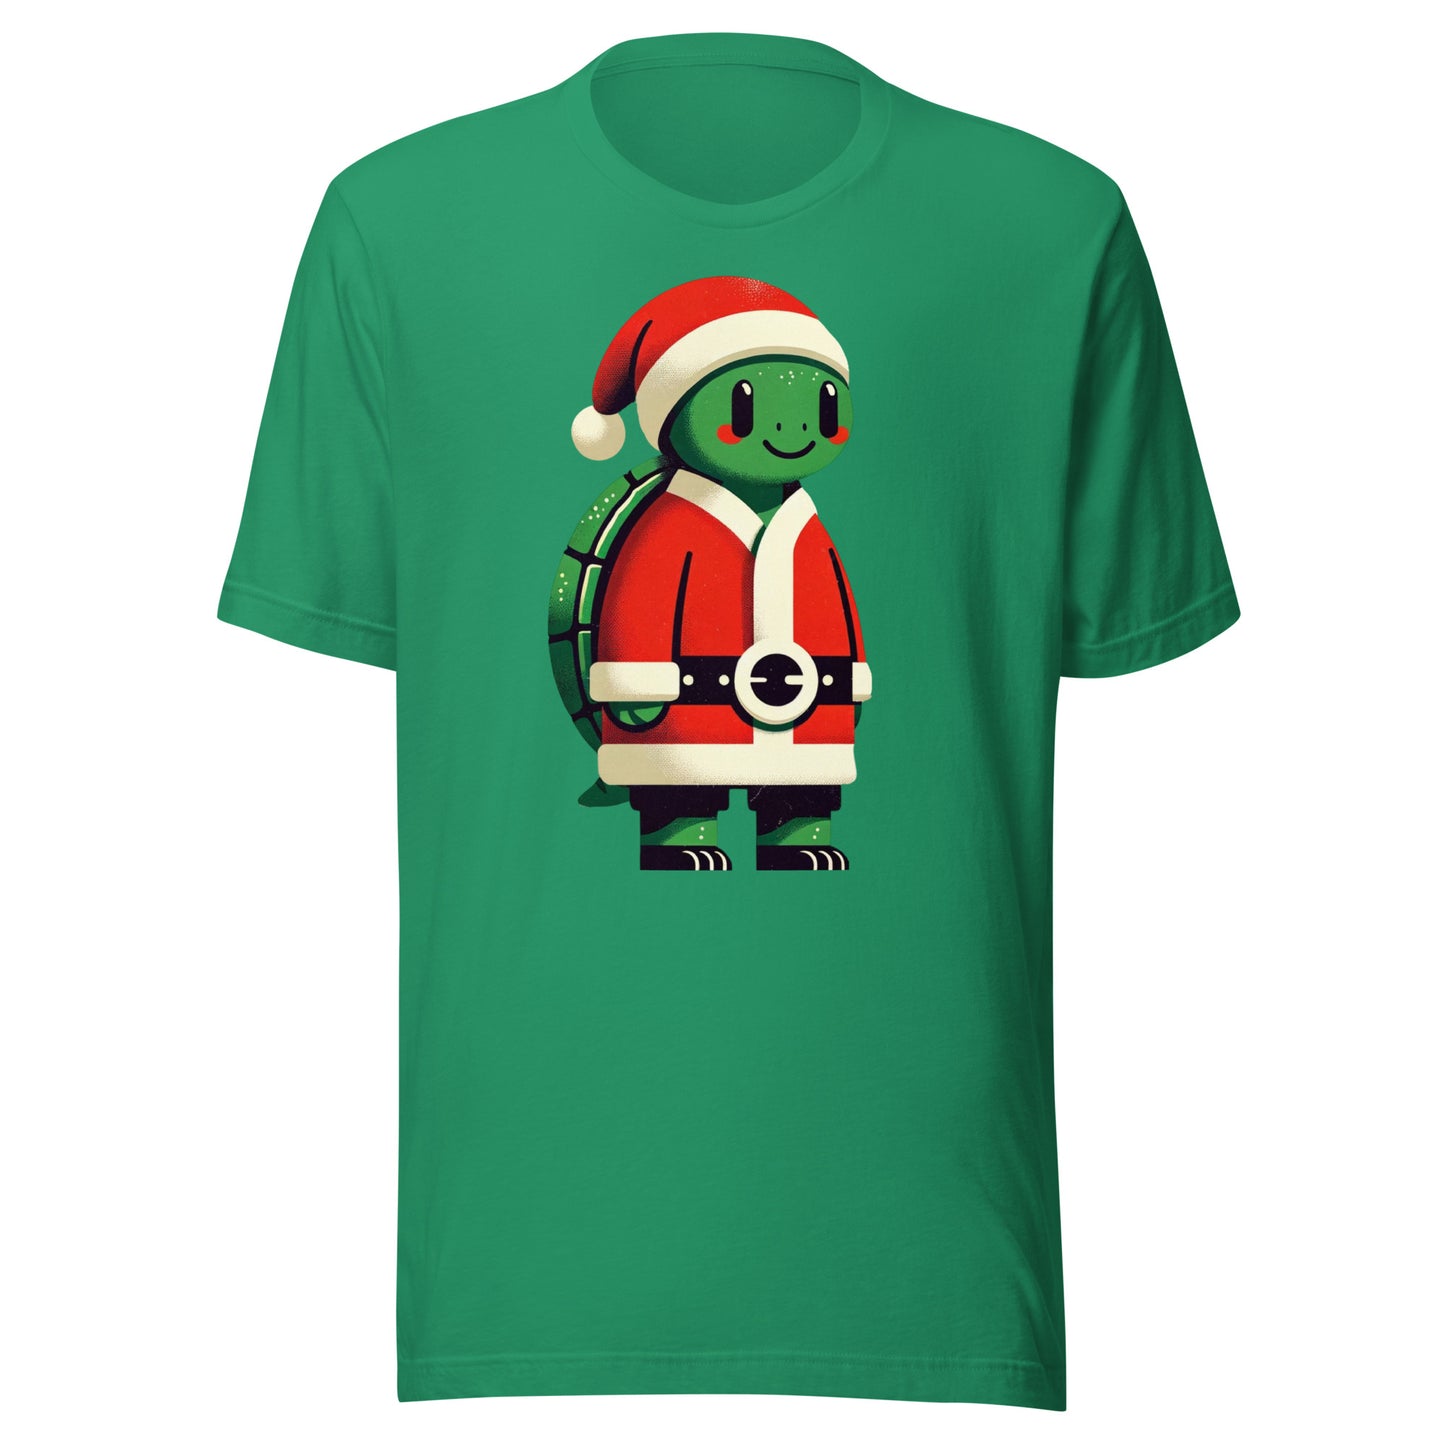 Turtle in a Santa Suit: Spreading Happy Vintage Christmas Cheer Unisex t-shirt